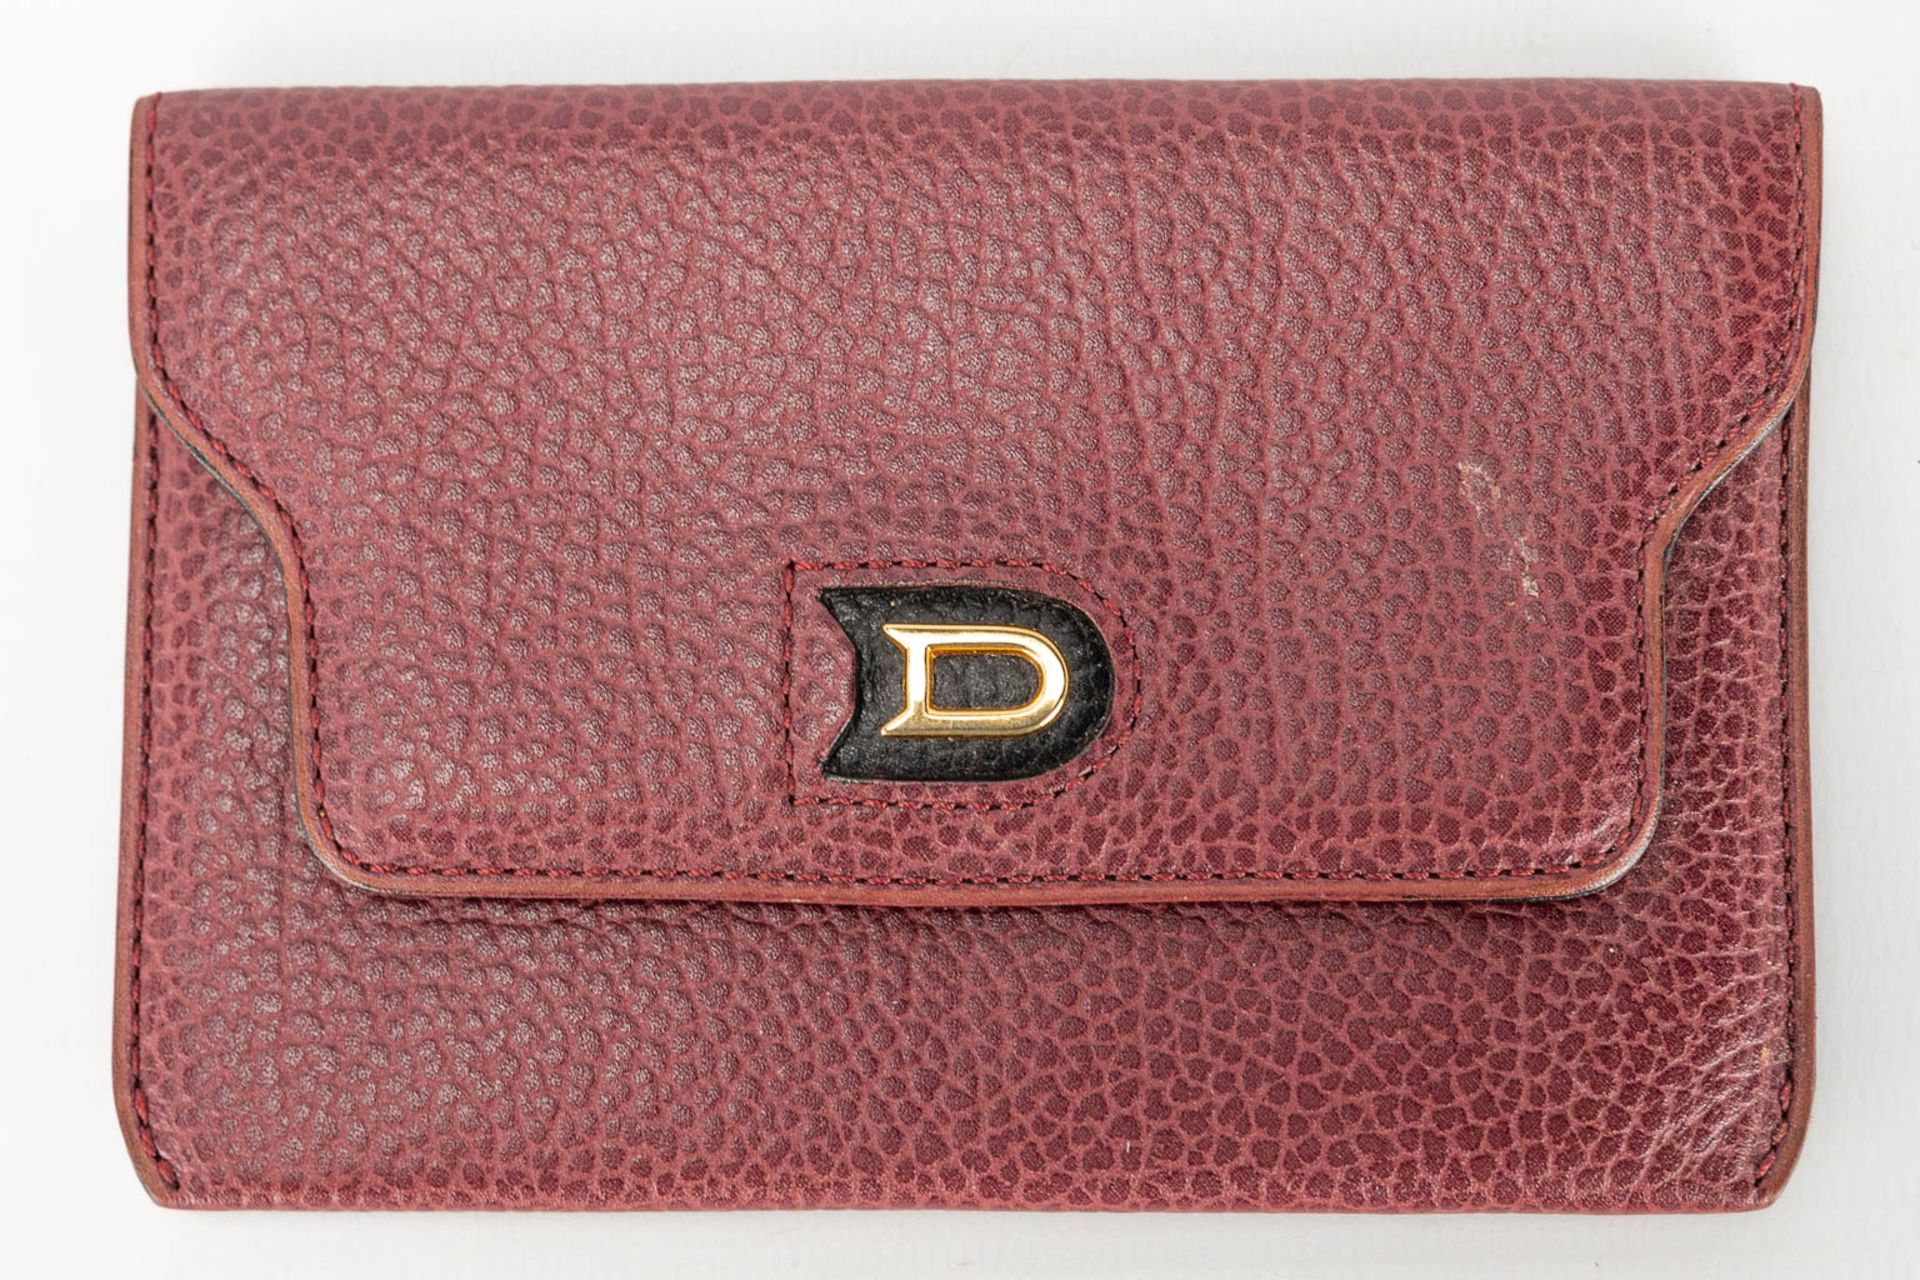 A collection of 3 ladies wallets made of leather and marked Delvaux - Image 11 of 14